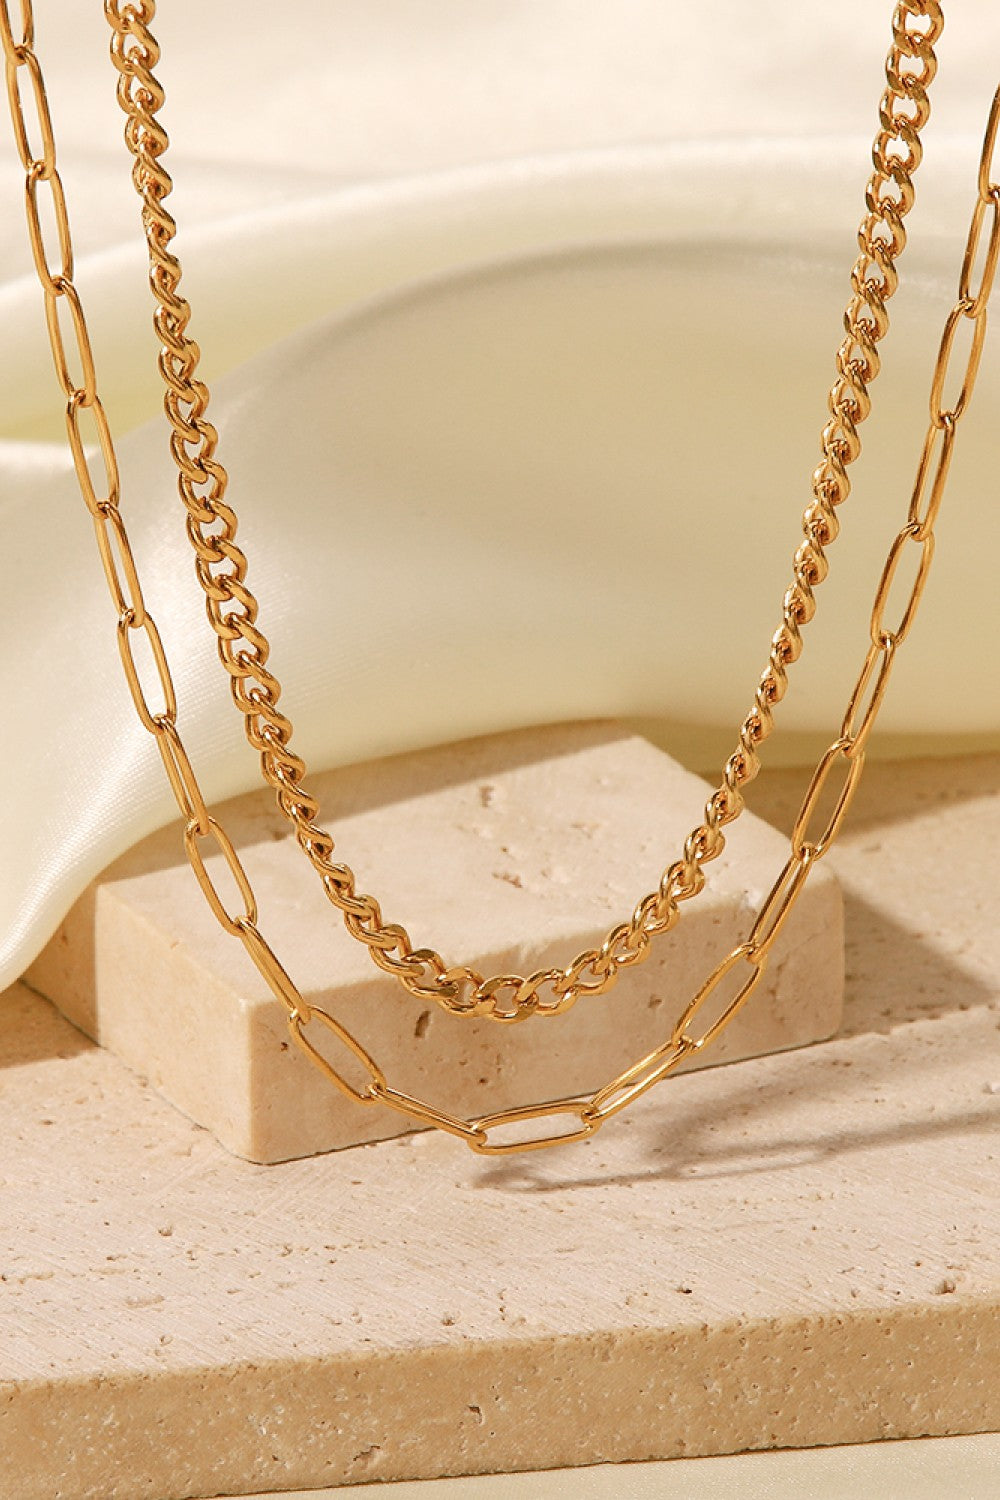 L. Klein 18K Gold Paperclip Chain Necklace - Bergdorf Goodman